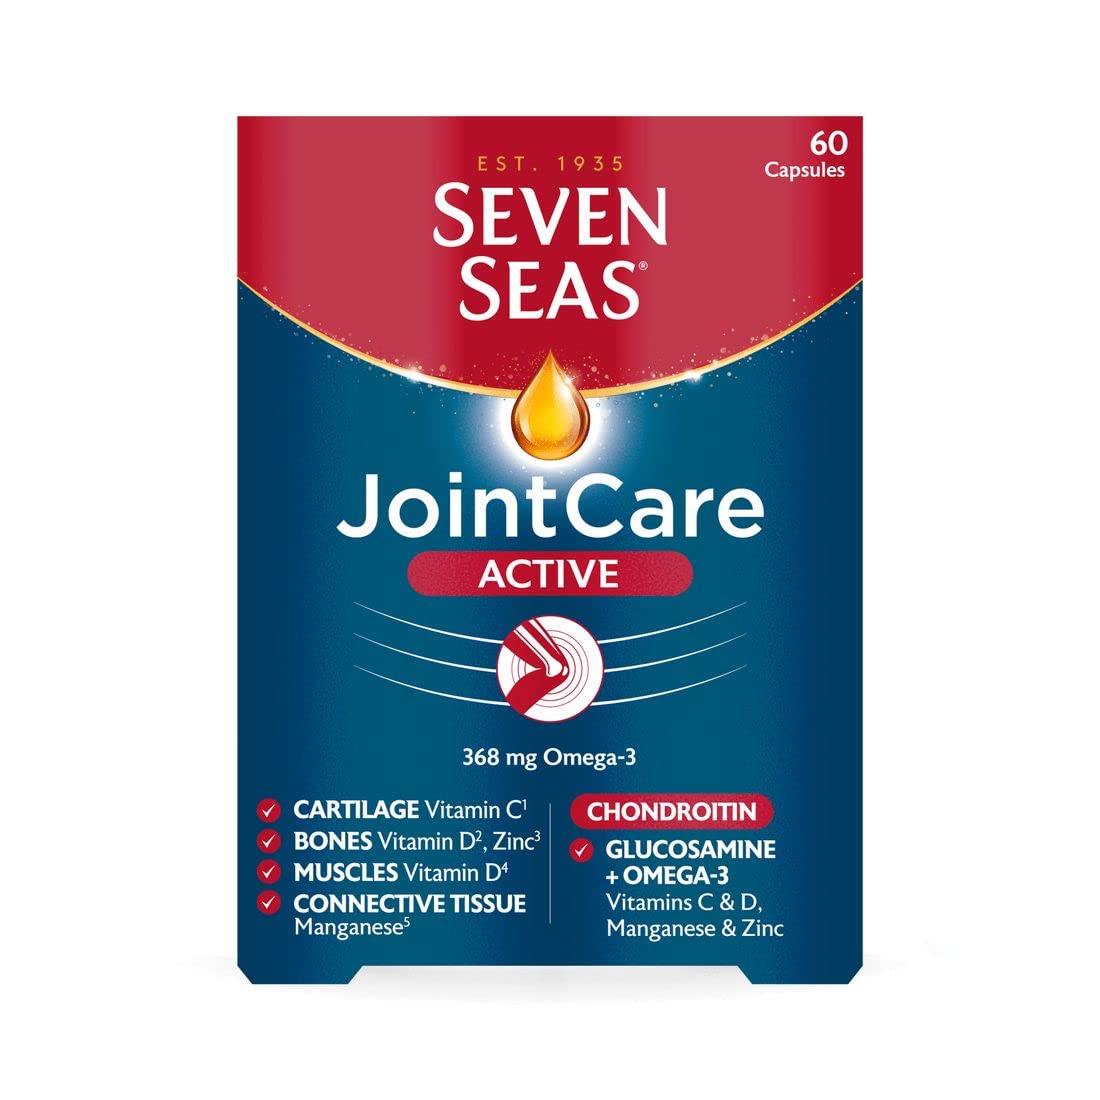 Seven Seas JointCare Active - 60 Capsules